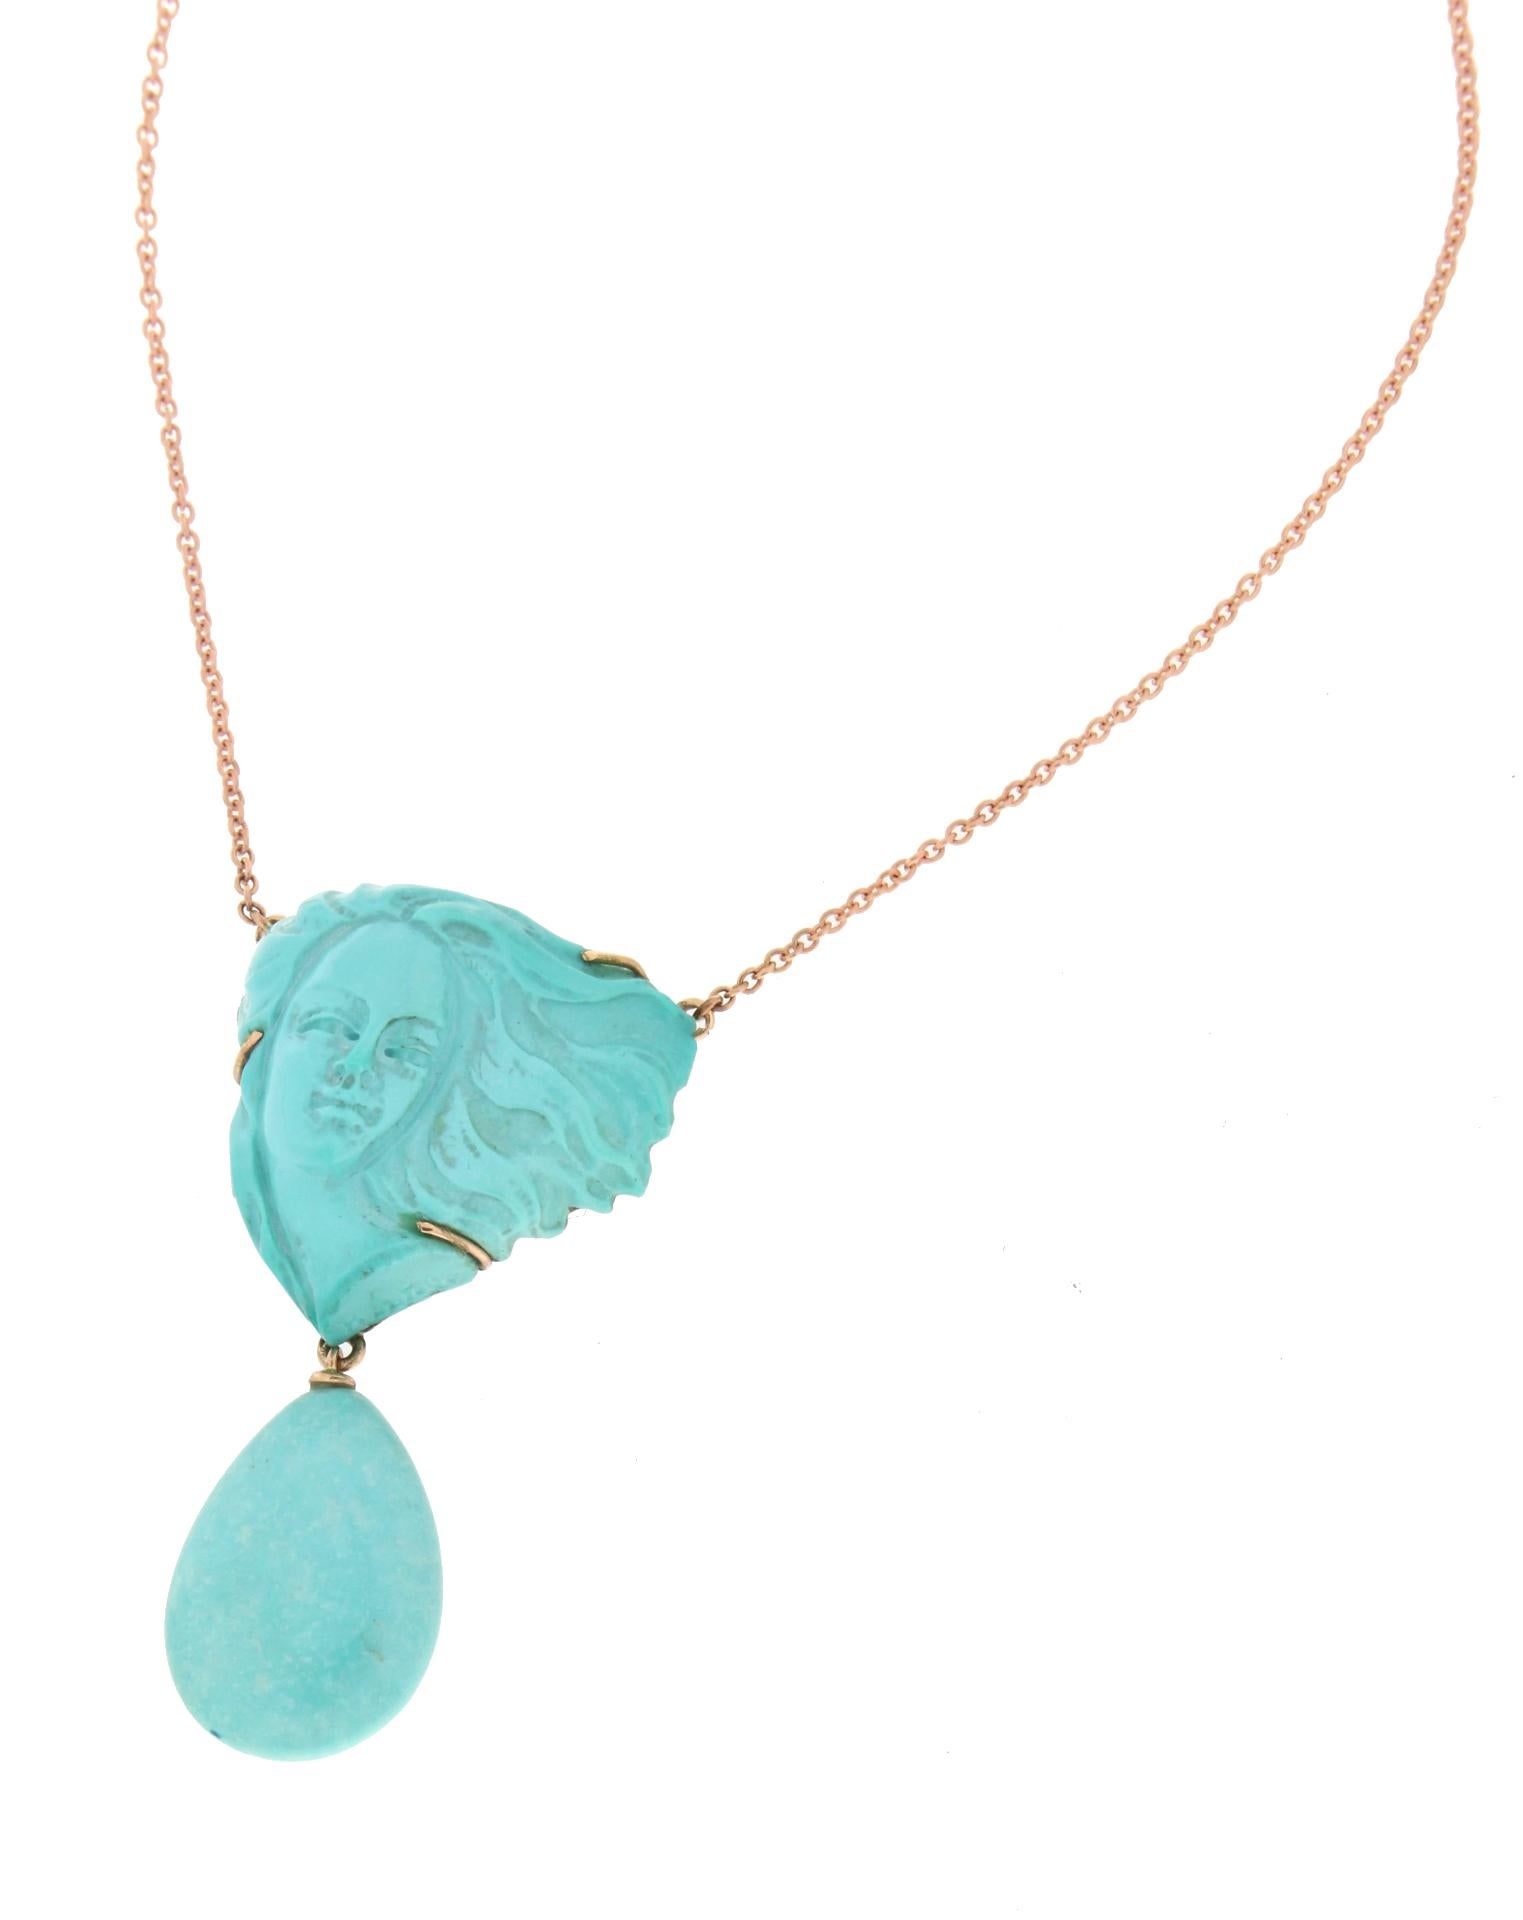 Artisan Handcraft Turquoise Cameo 14 Karat Yellow Gold Pendant Necklace For Sale